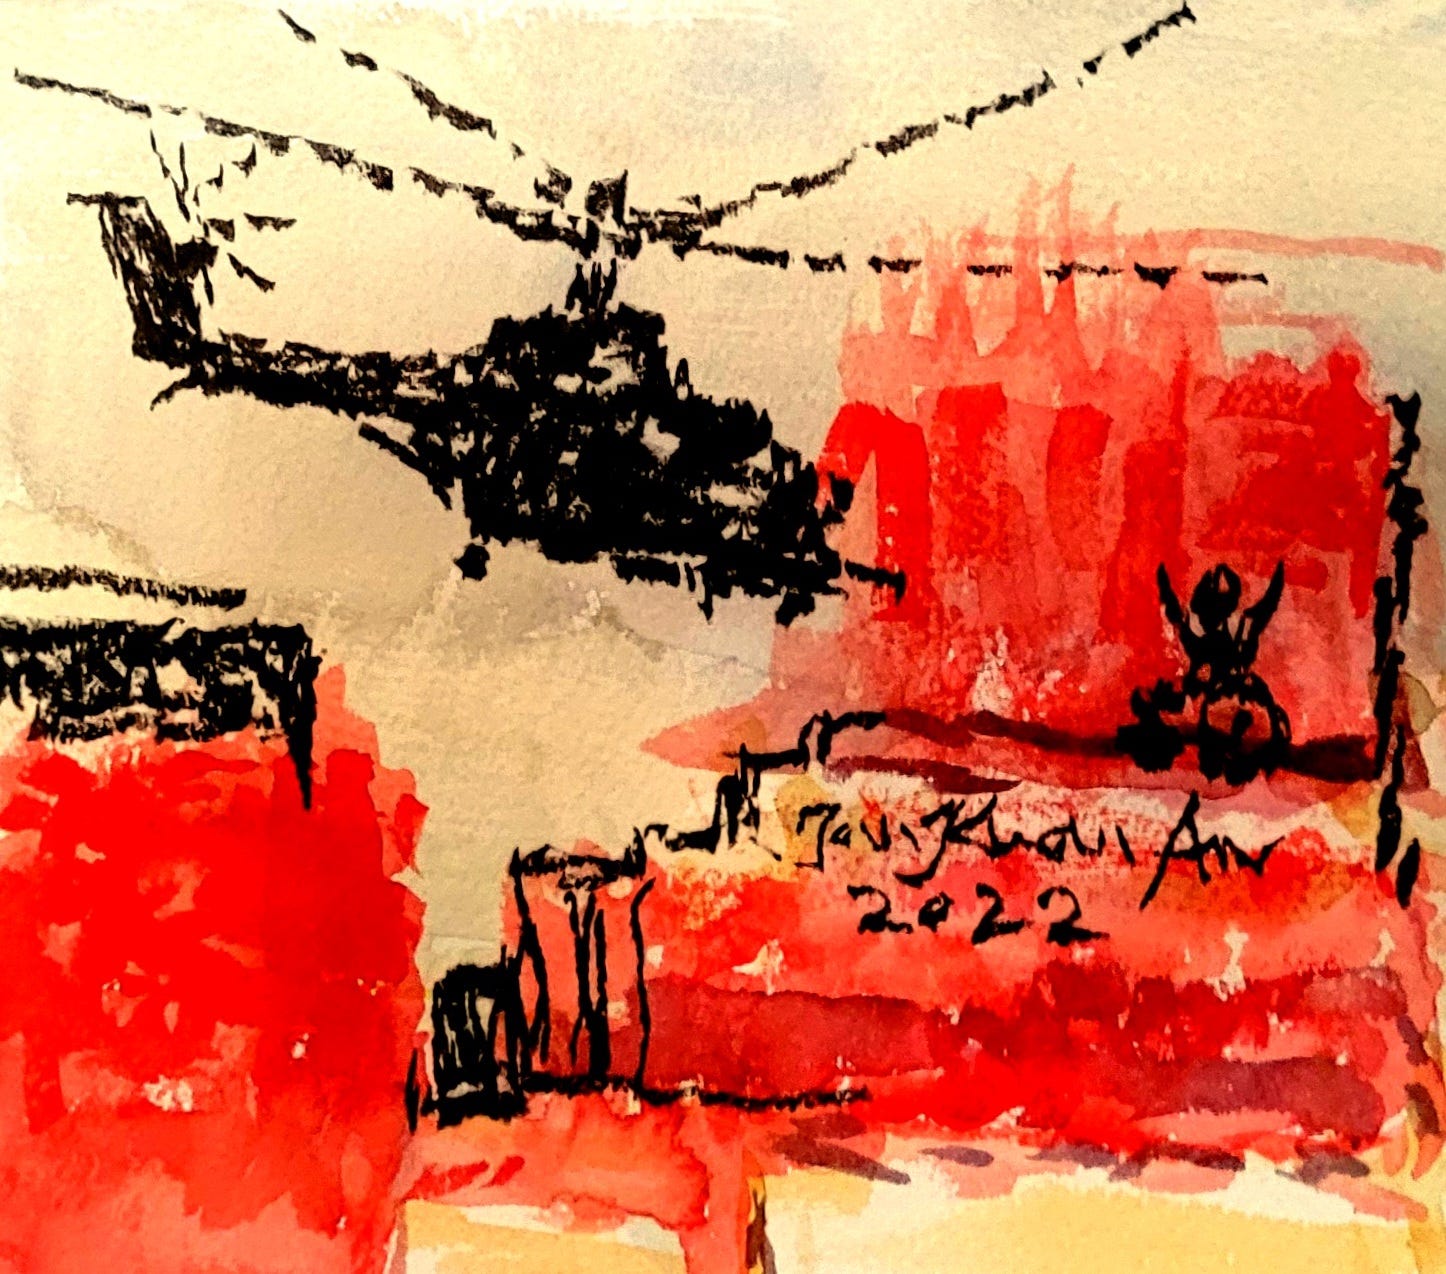 Watercolour image shows a black outline of an attack helicopter facing a small outline of a wheelchair user with their hands up. The wheelchair user is on an elevated building, with the backgrounds to the buildings drenched in red.